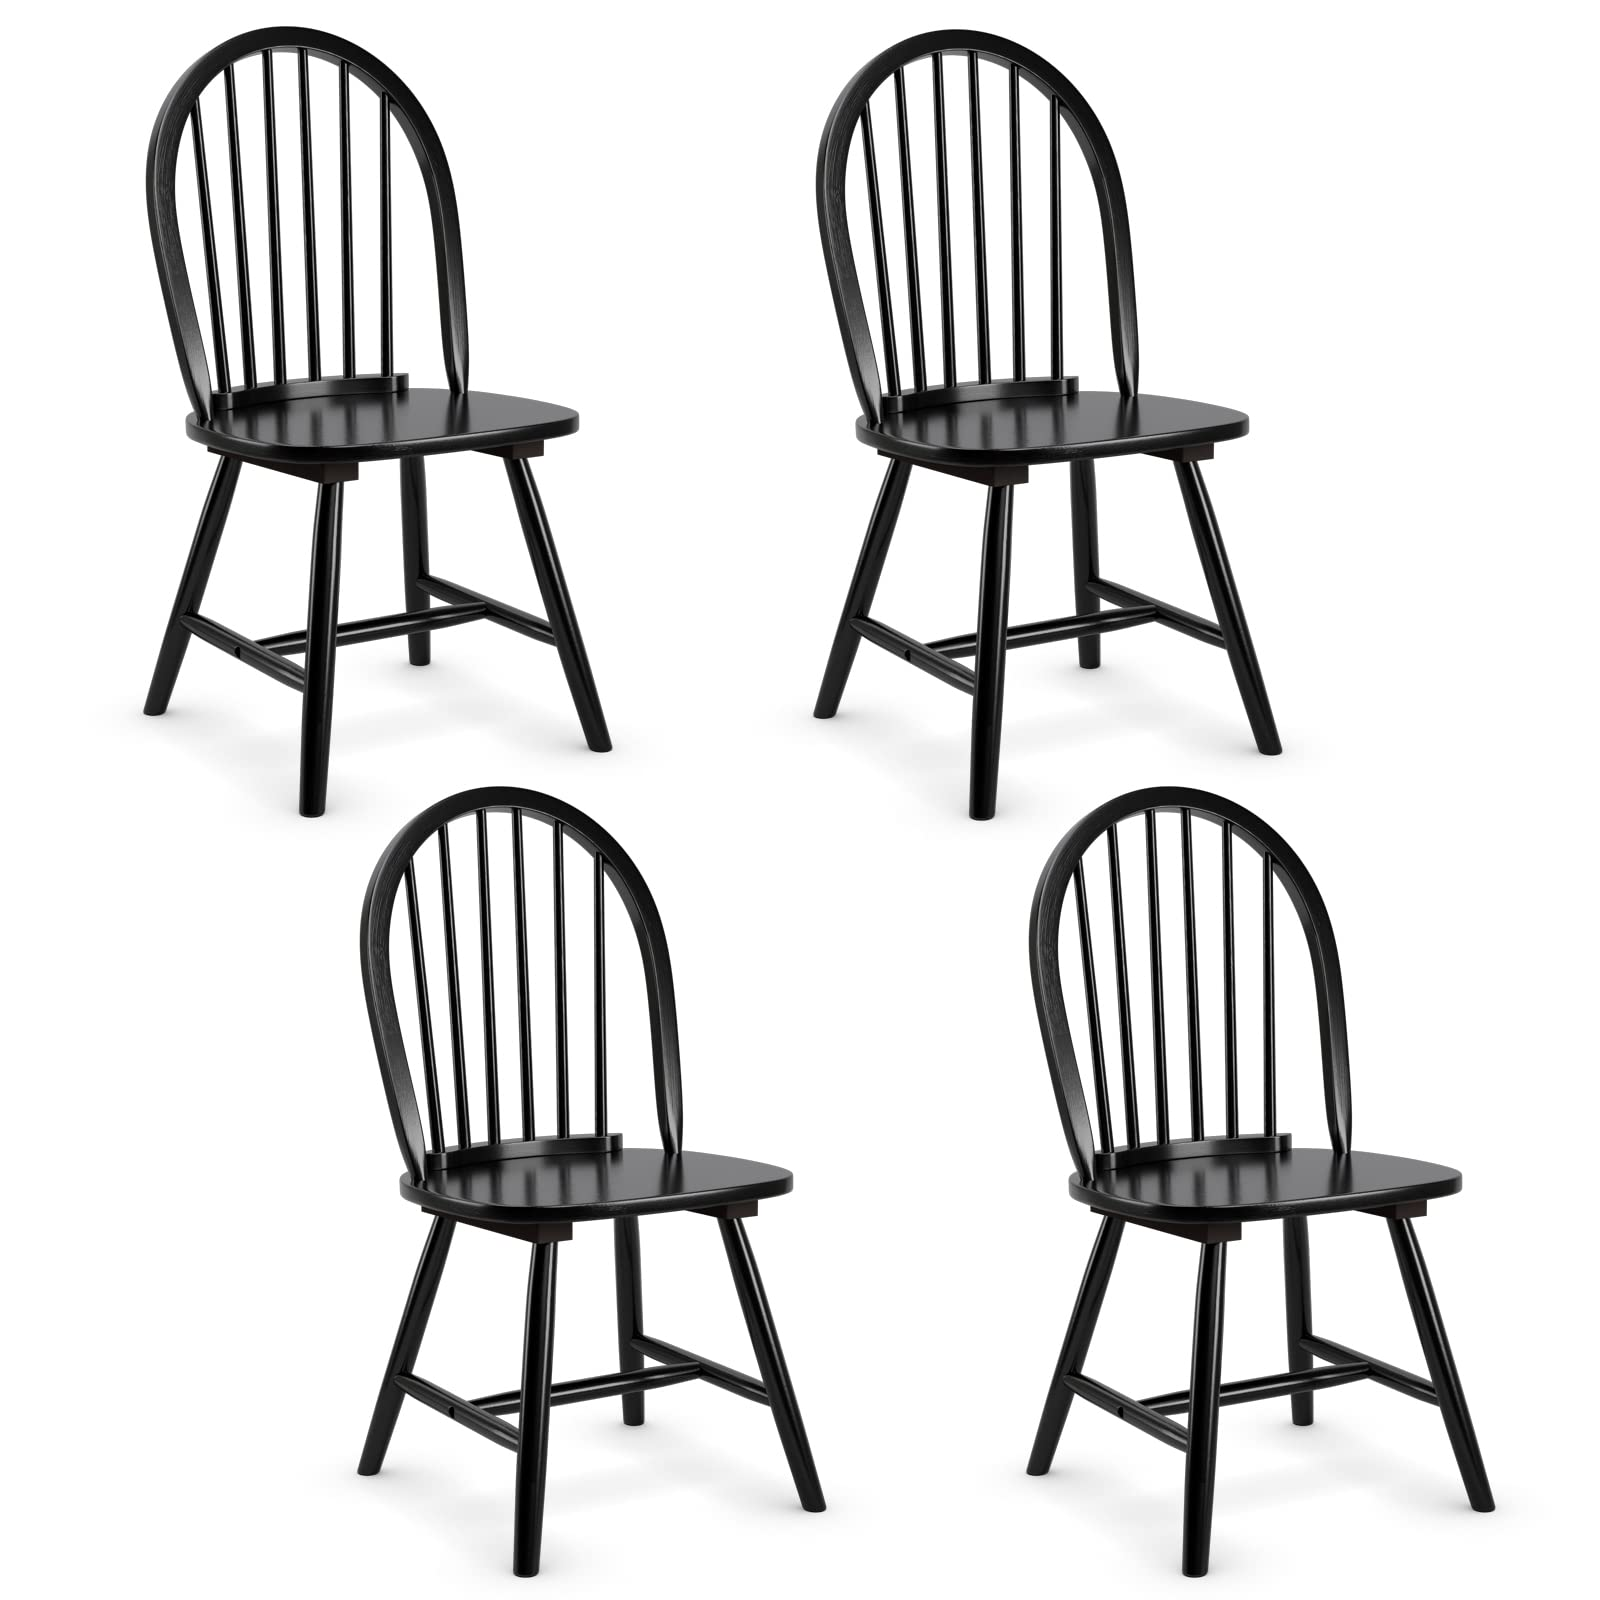 Giantex Wood Dining Chairs, French Country Armless Spindle Back Dining Chairs